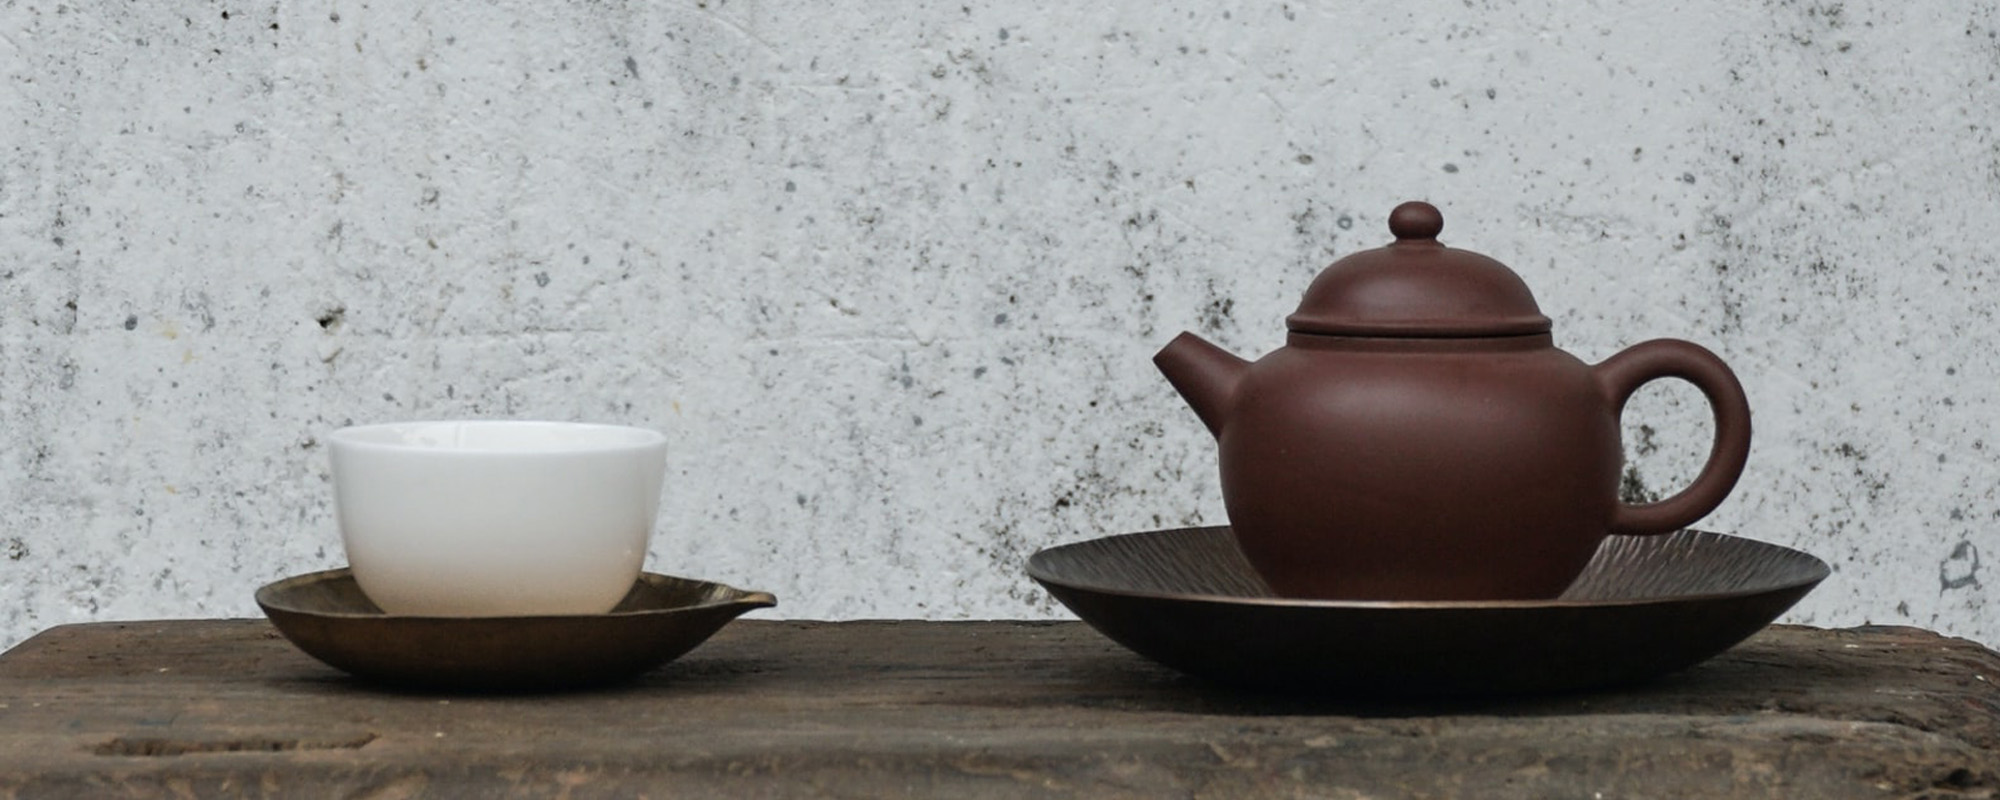 Tea pot and cup on wooden table